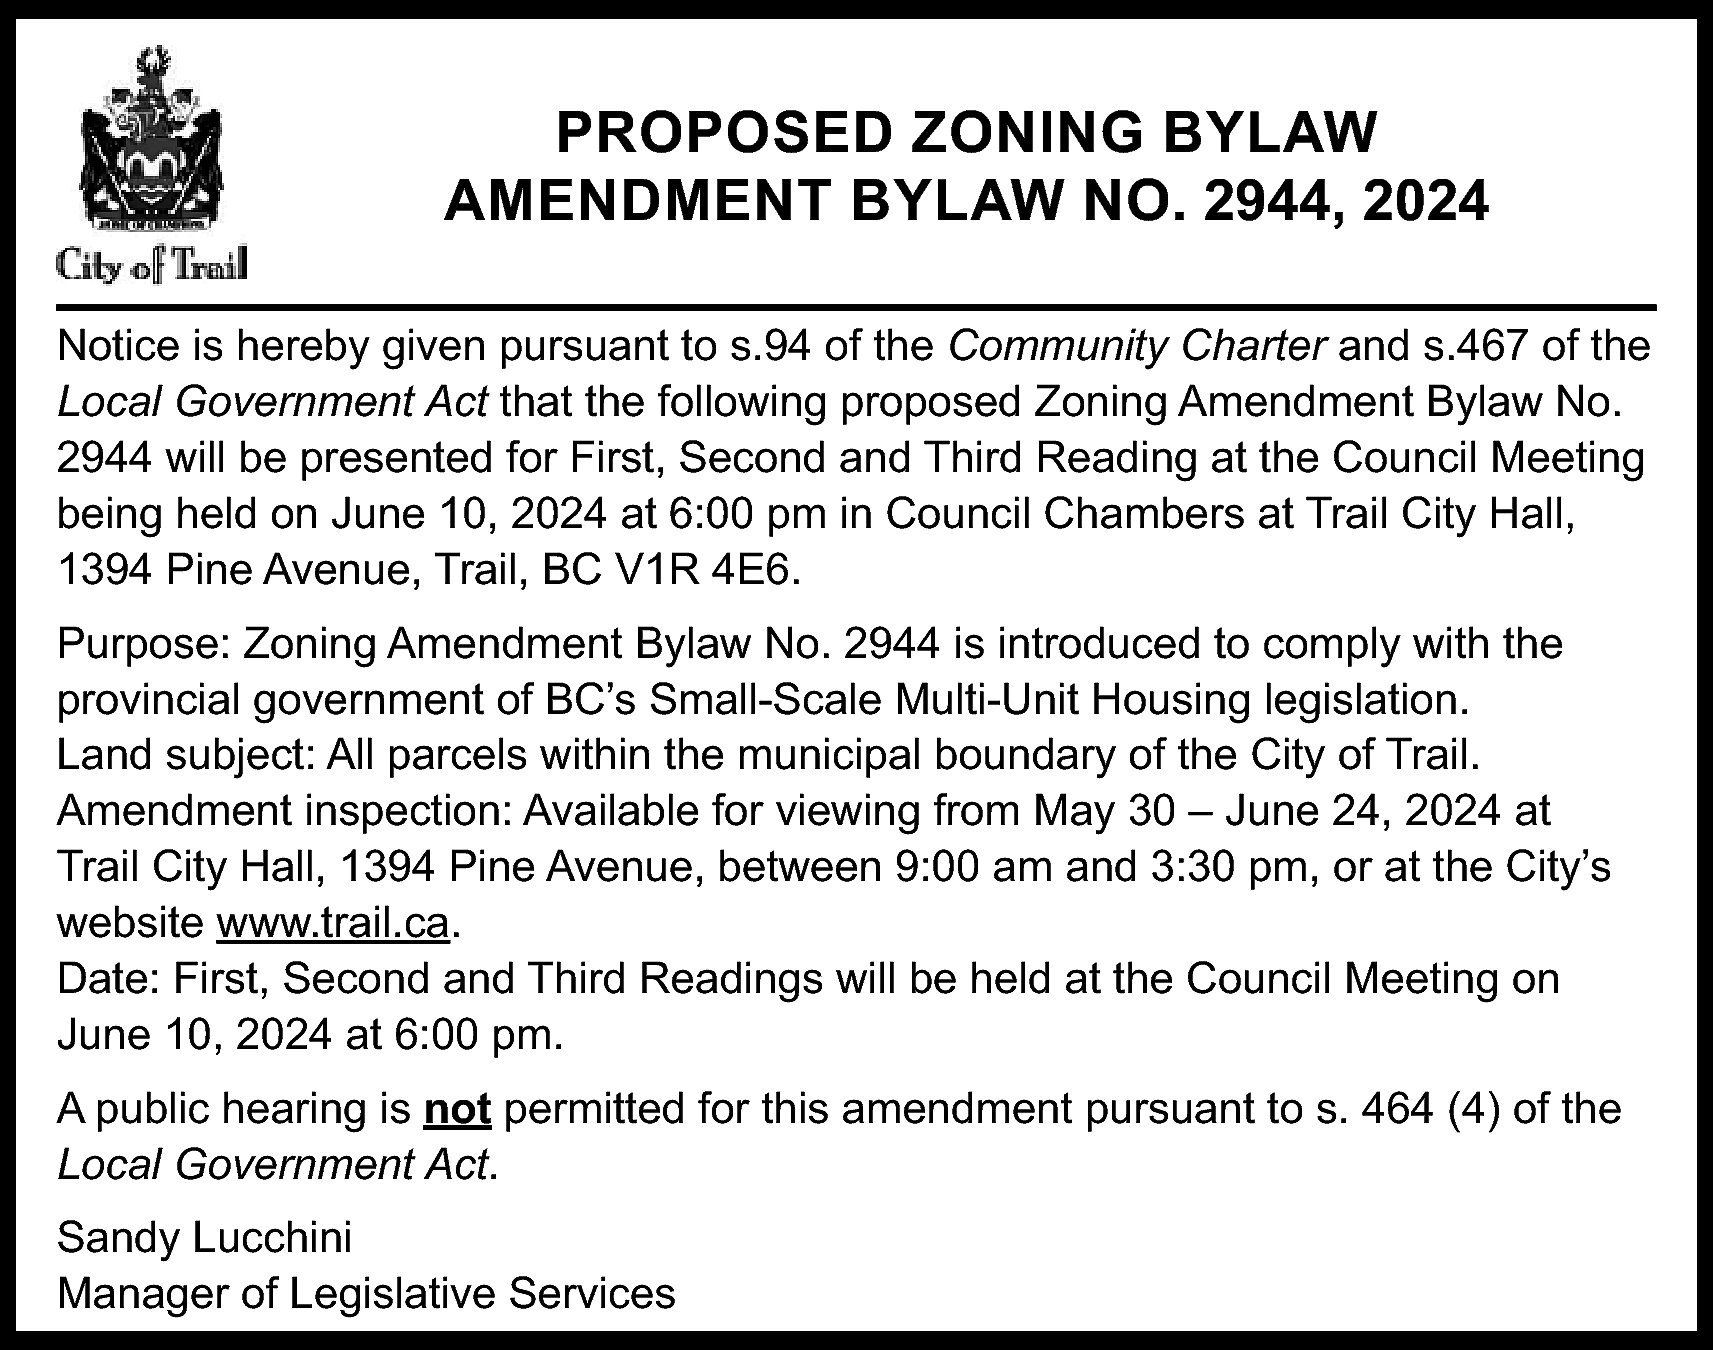 PROPOSED ZONING BYLAW <br>AMENDMENT BYLAW  PROPOSED ZONING BYLAW  AMENDMENT BYLAW NO. 2944, 2024  Notice is hereby given pursuant to s.94 of the Community Charter and s.467 of the  Local Government Act that the following proposed Zoning Amendment Bylaw No.  2944 will be presented for First, Second and Third Reading at the Council Meeting  being held on June 10, 2024 at 6:00 pm in Council Chambers at Trail City Hall,  1394 Pine Avenue, Trail, BC V1R 4E6.  Purpose: Zoning Amendment Bylaw No. 2944 is introduced to comply with the  provincial government of BC’s Small-Scale Multi-Unit Housing legislation.  Land subject: All parcels within the municipal boundary of the City of Trail.  Amendment inspection: Available for viewing from May 30 – June 24, 2024 at  Trail City Hall, 1394 Pine Avenue, between 9:00 am and 3:30 pm, or at the City’s  website www.trail.ca.  Date: First, Second and Third Readings will be held at the Council Meeting on  June 10, 2024 at 6:00 pm.  A public hearing is not permitted for this amendment pursuant to s. 464 (4) of the  Local Government Act.  Sandy Lucchini  Manager of Legislative Services    